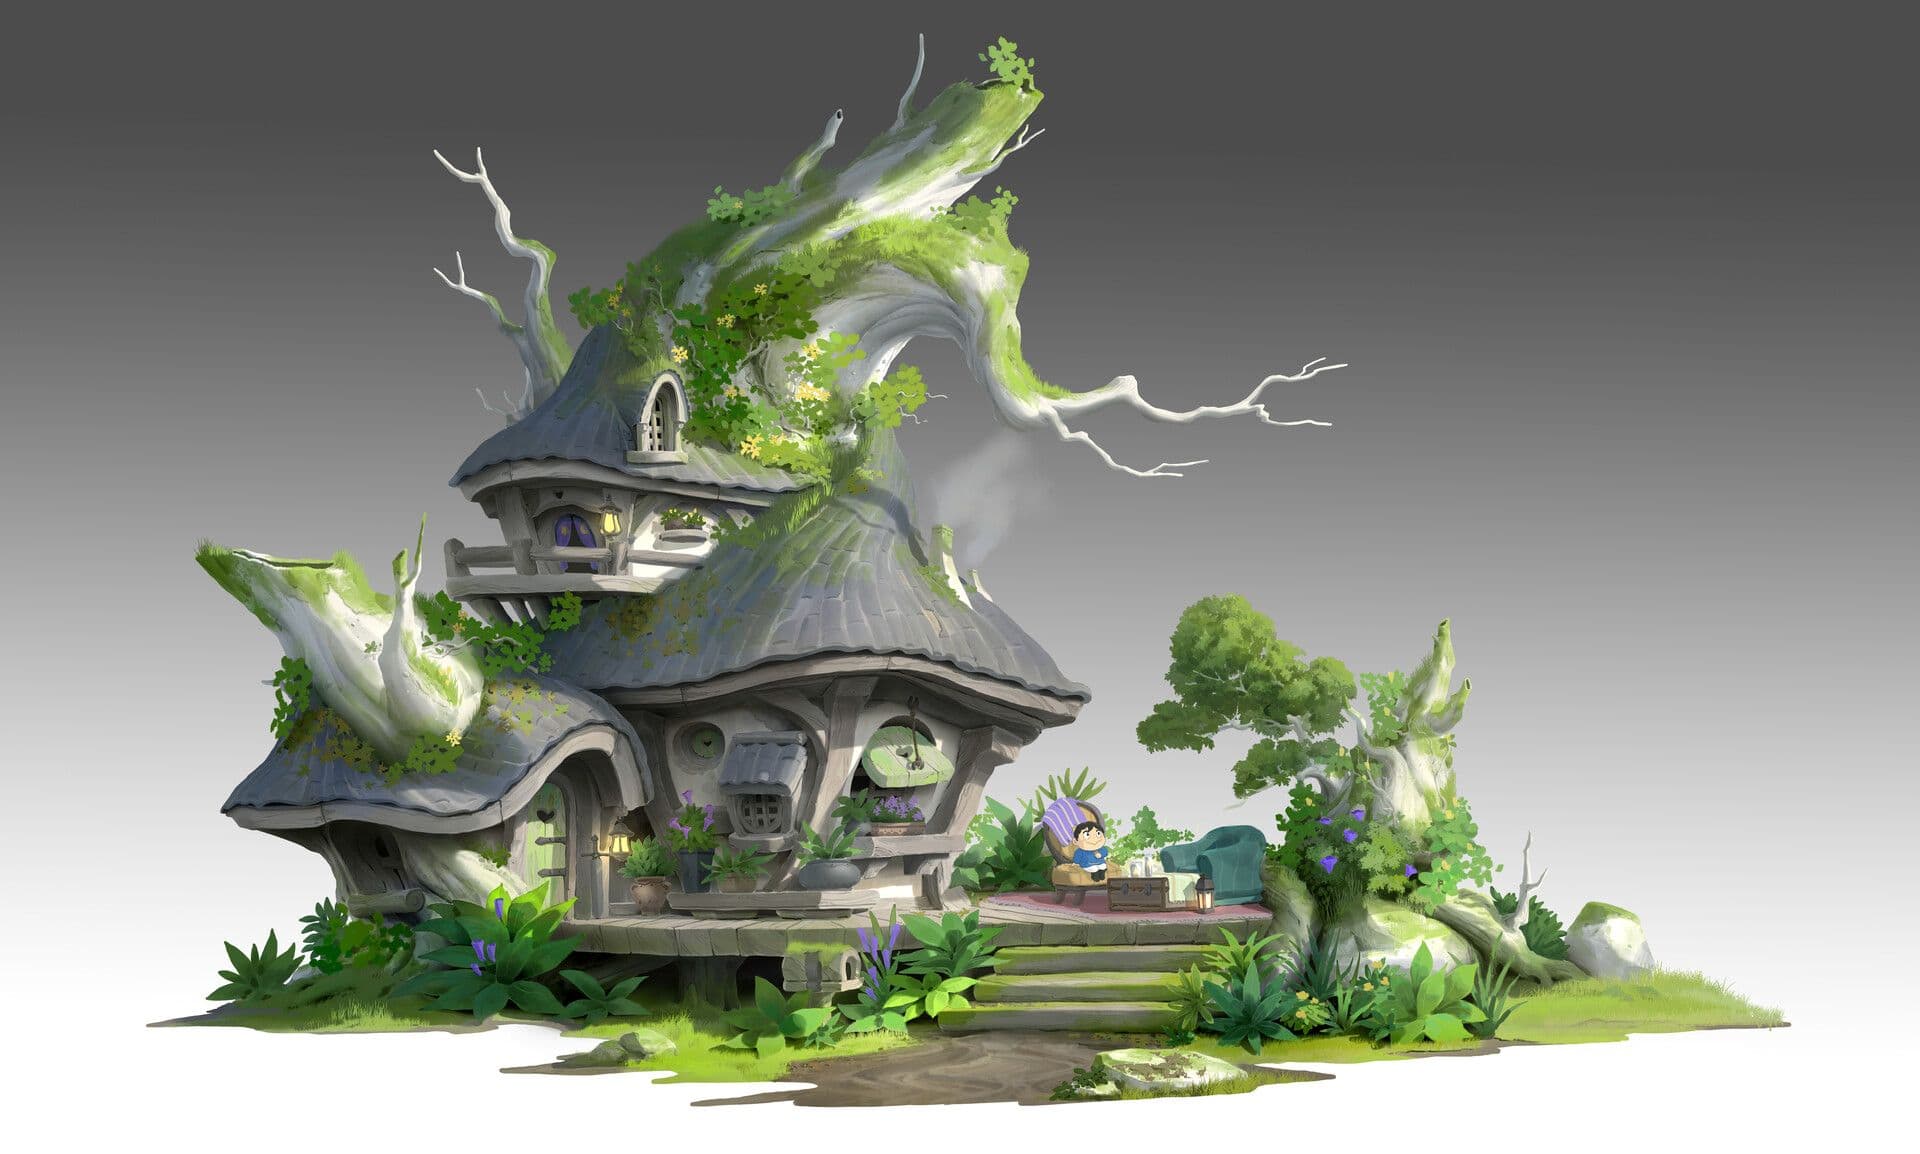 Treehouse concept art by Yang Junchao